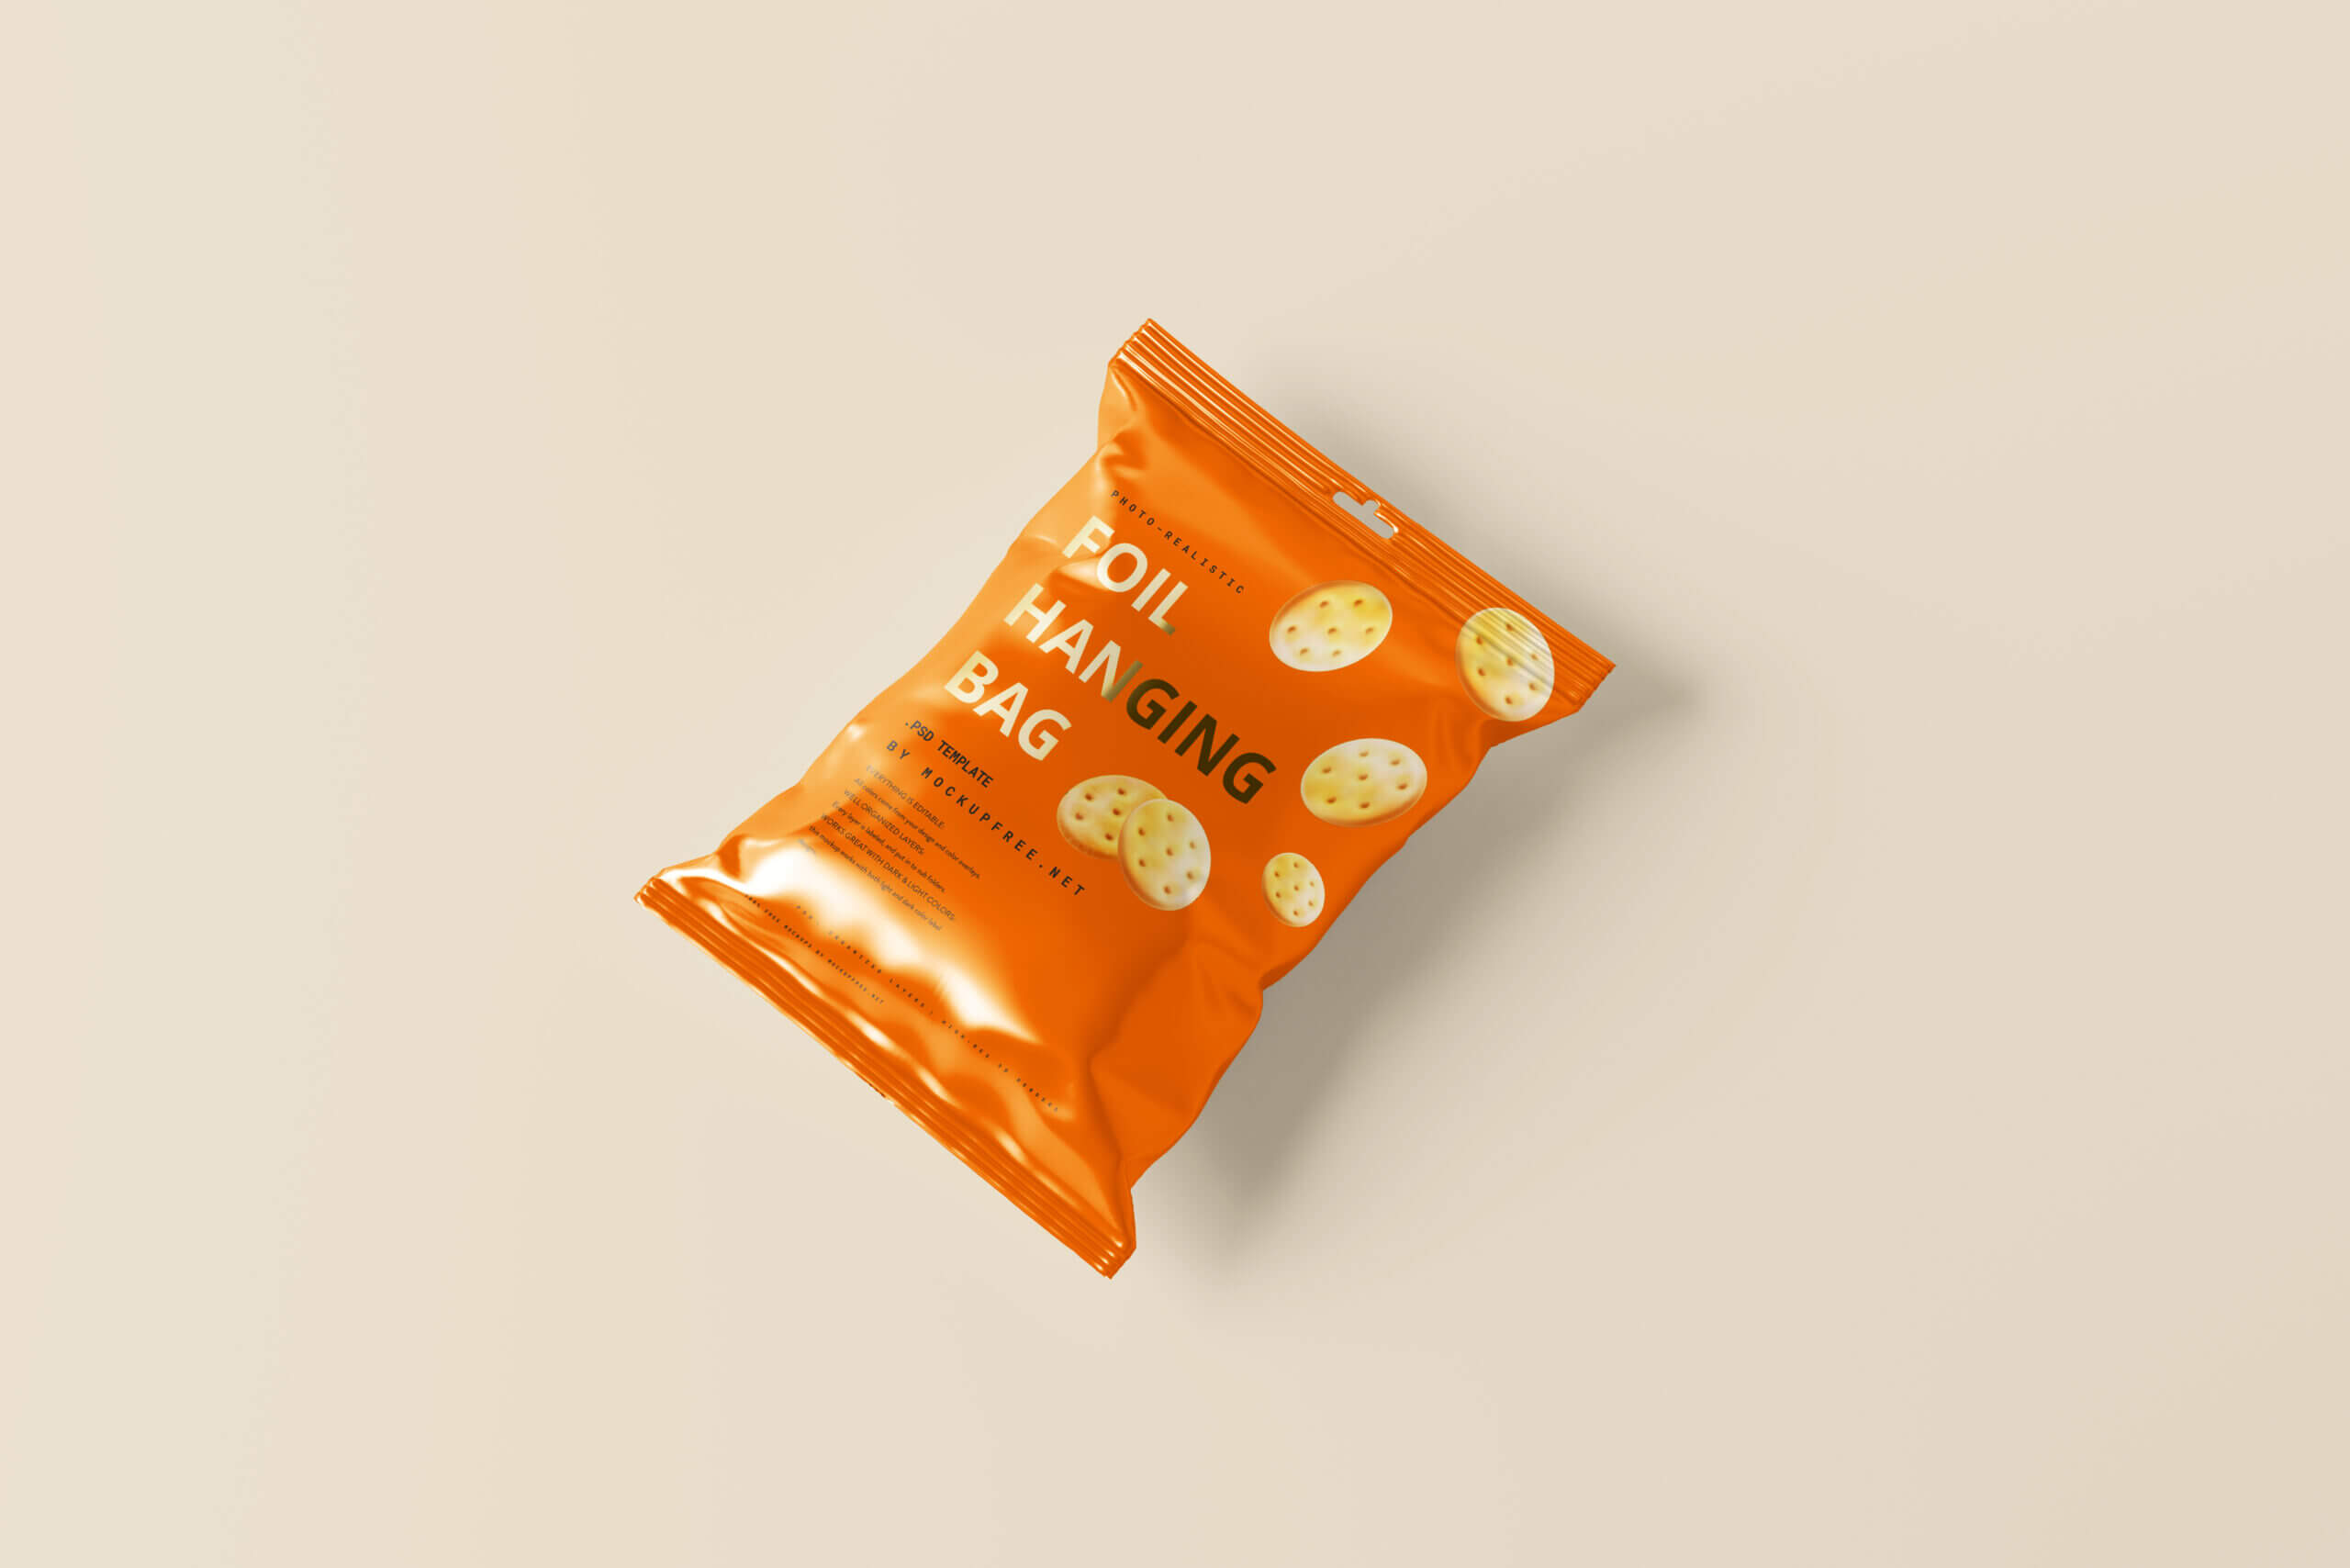 Hanging Snack Bag and Chips Foil Packet Mockups 10 different view4